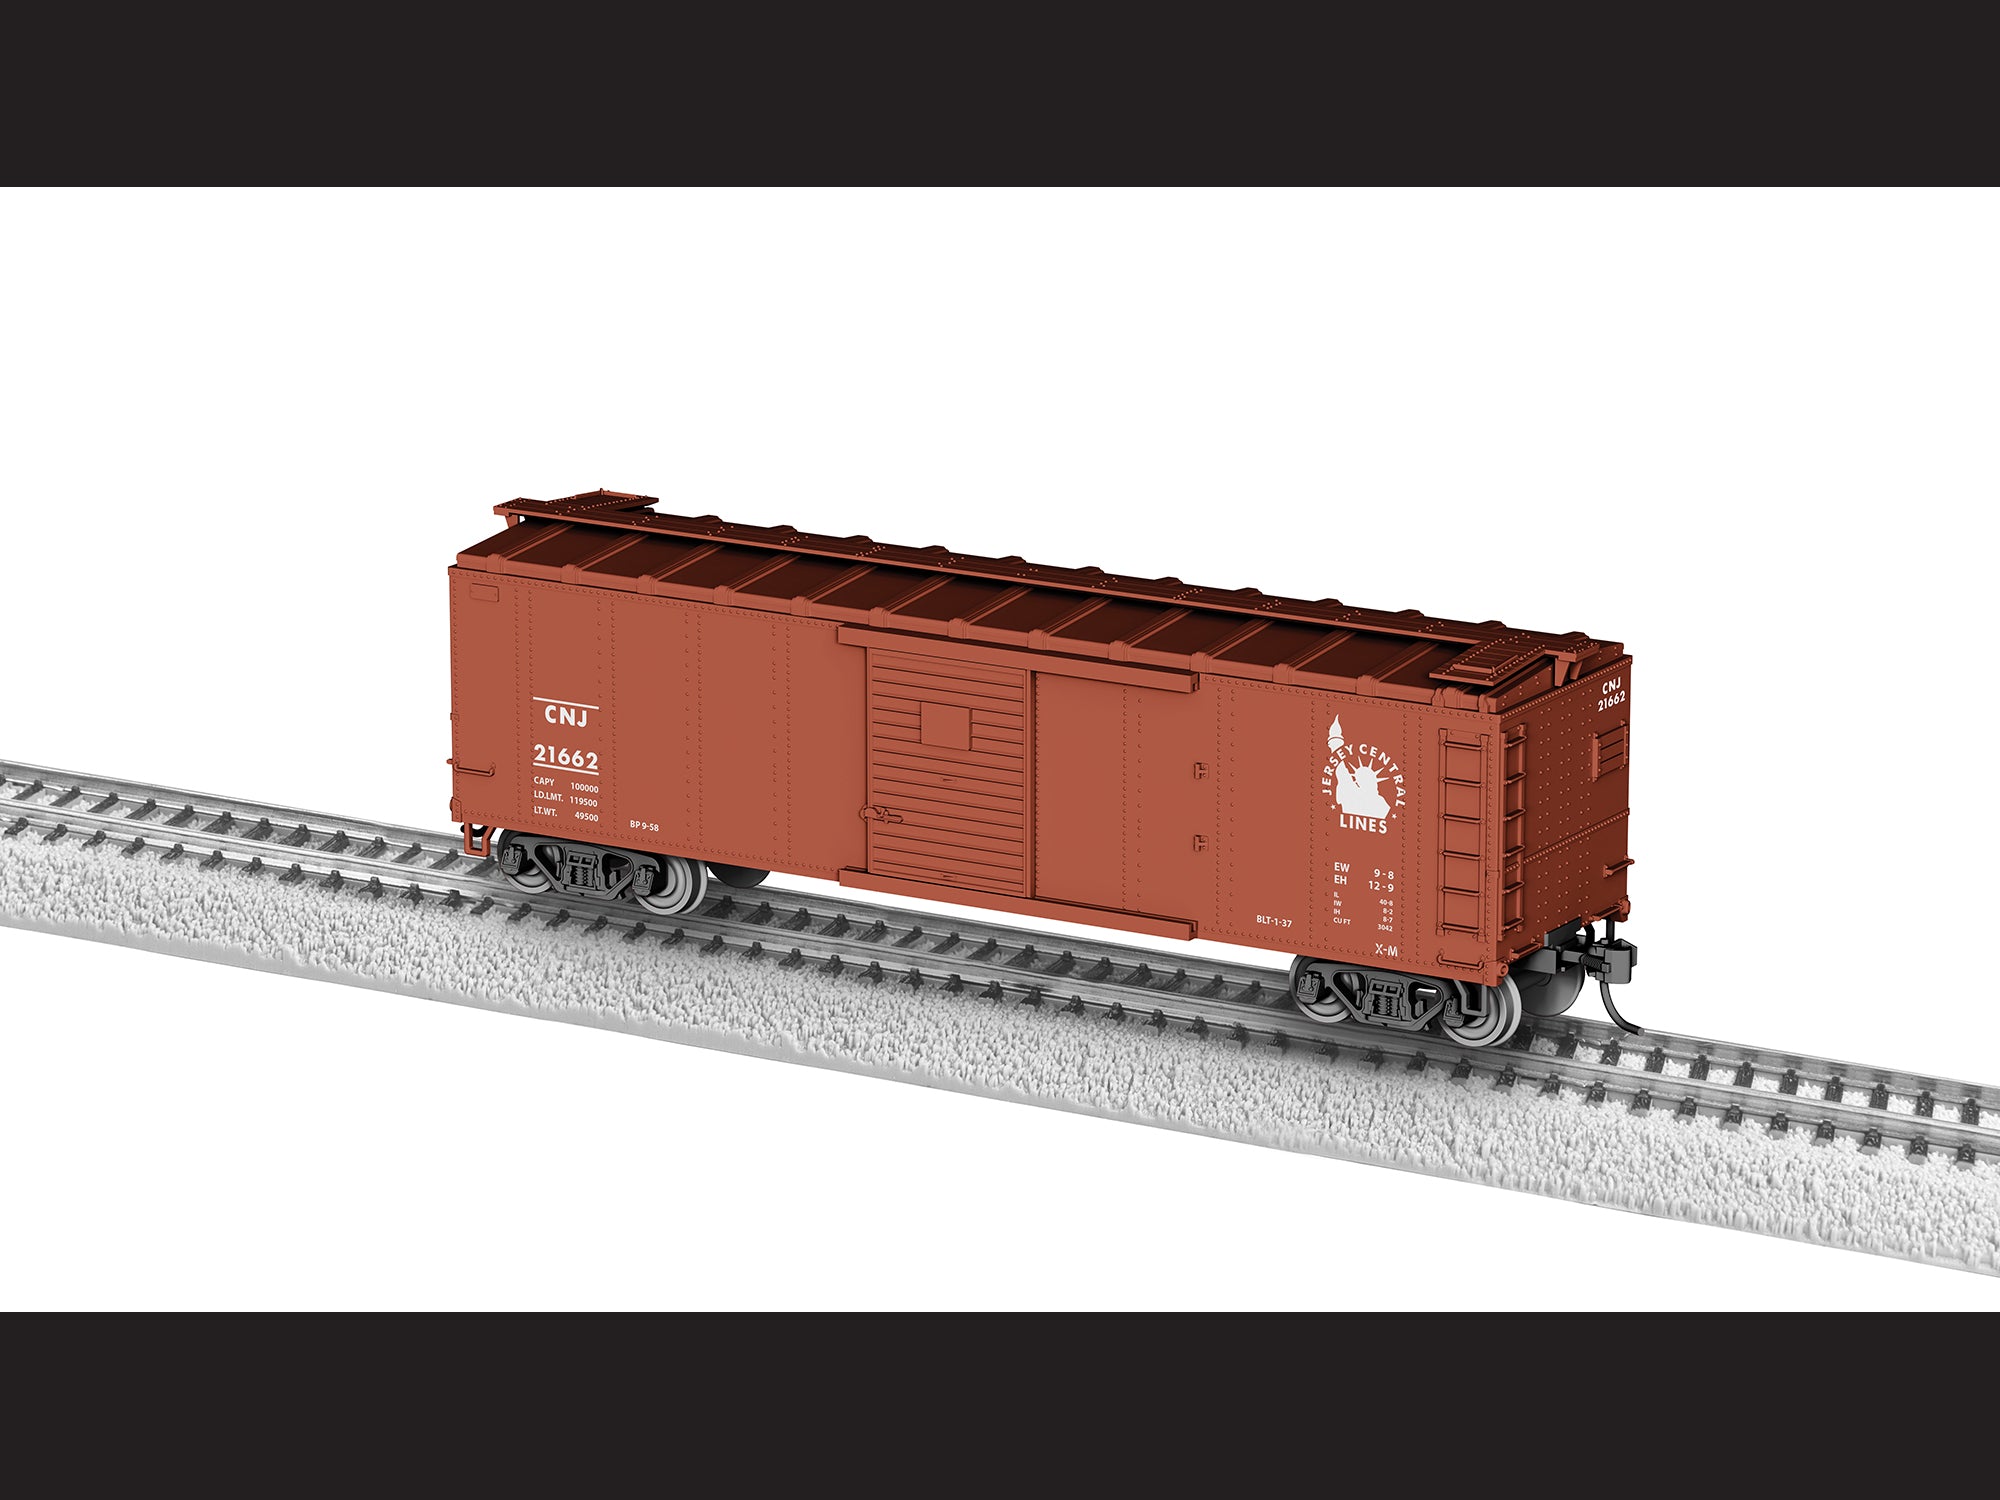 Lionel HO 2454200 - Boxcar "New Jersey Central" #21622